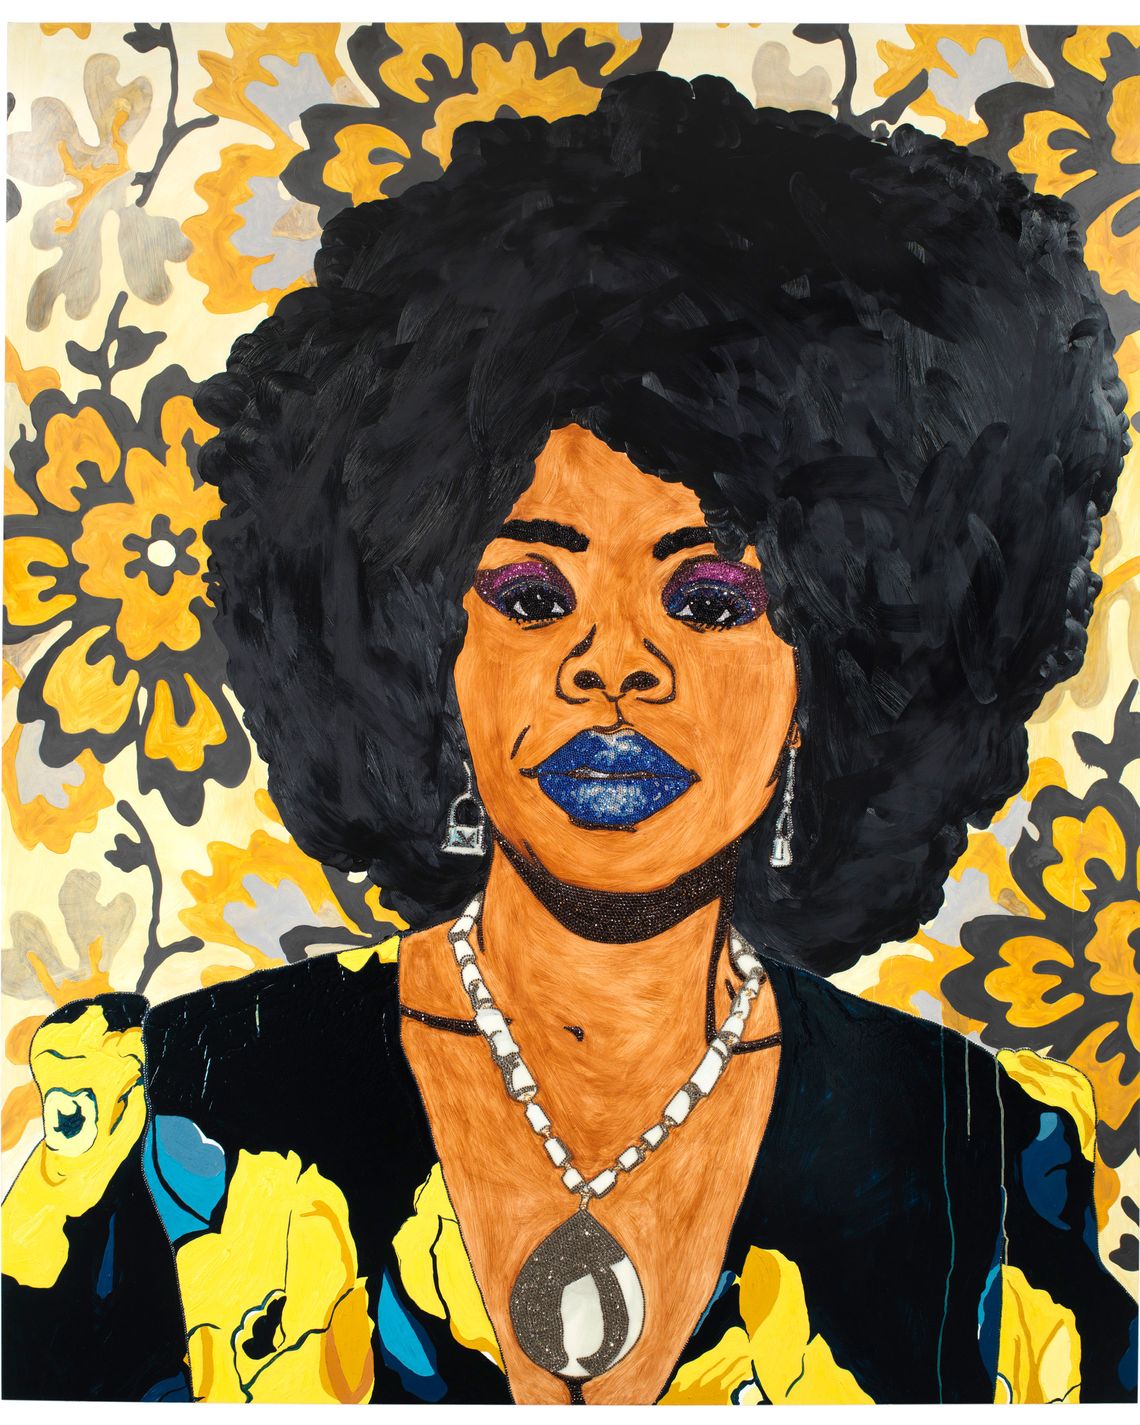 From Matisse to Mickalene Thomas: The Black Model in Art